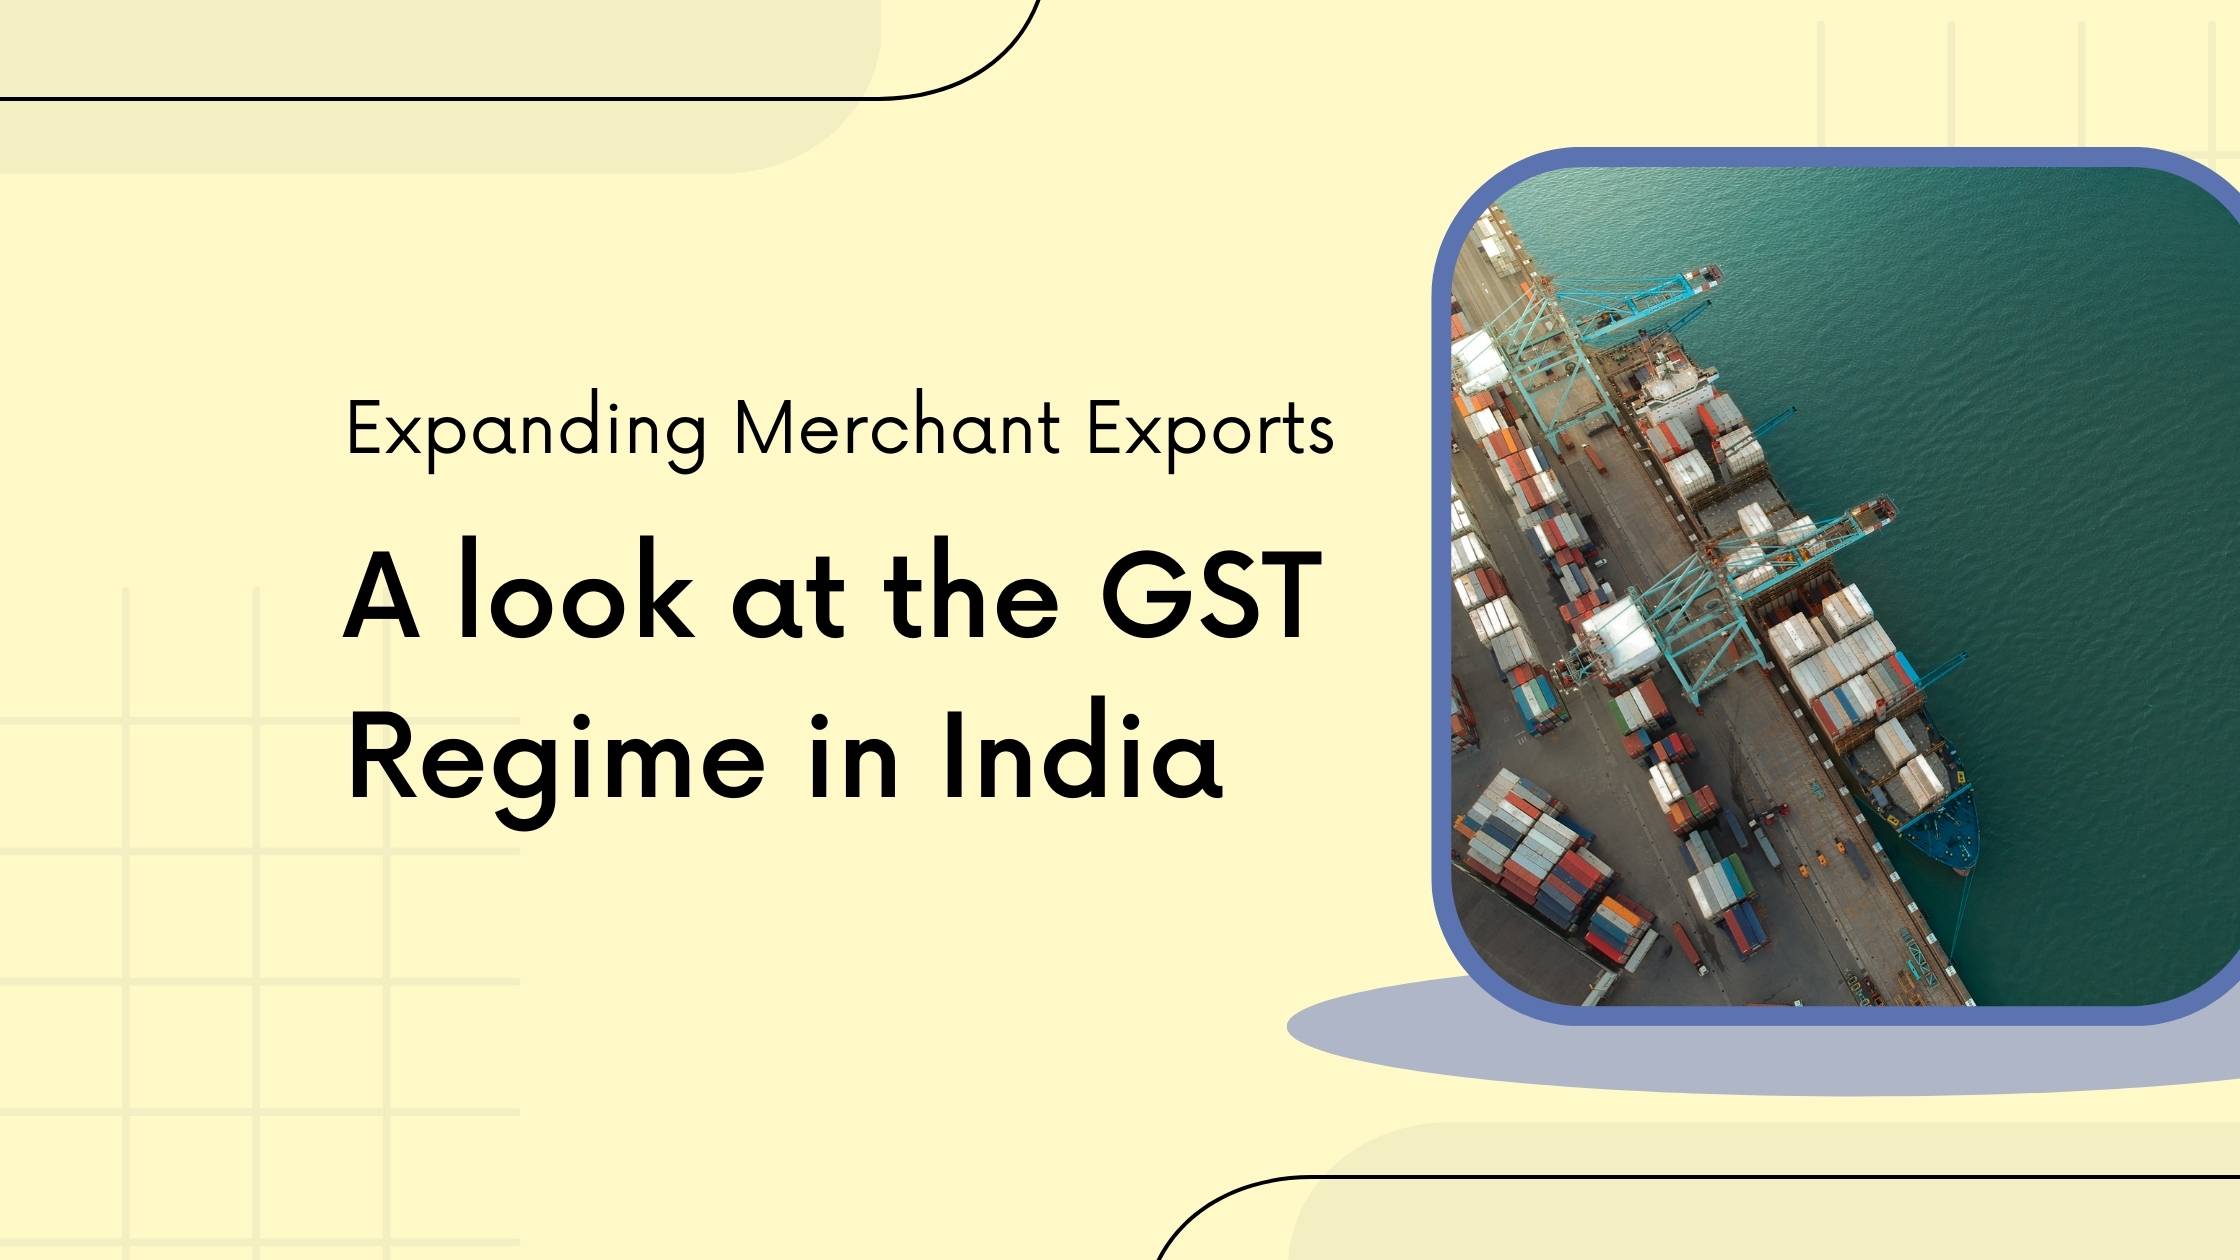 Expanding-Merchant-Exports-a-look-at-the-GST-regime-in-India-New